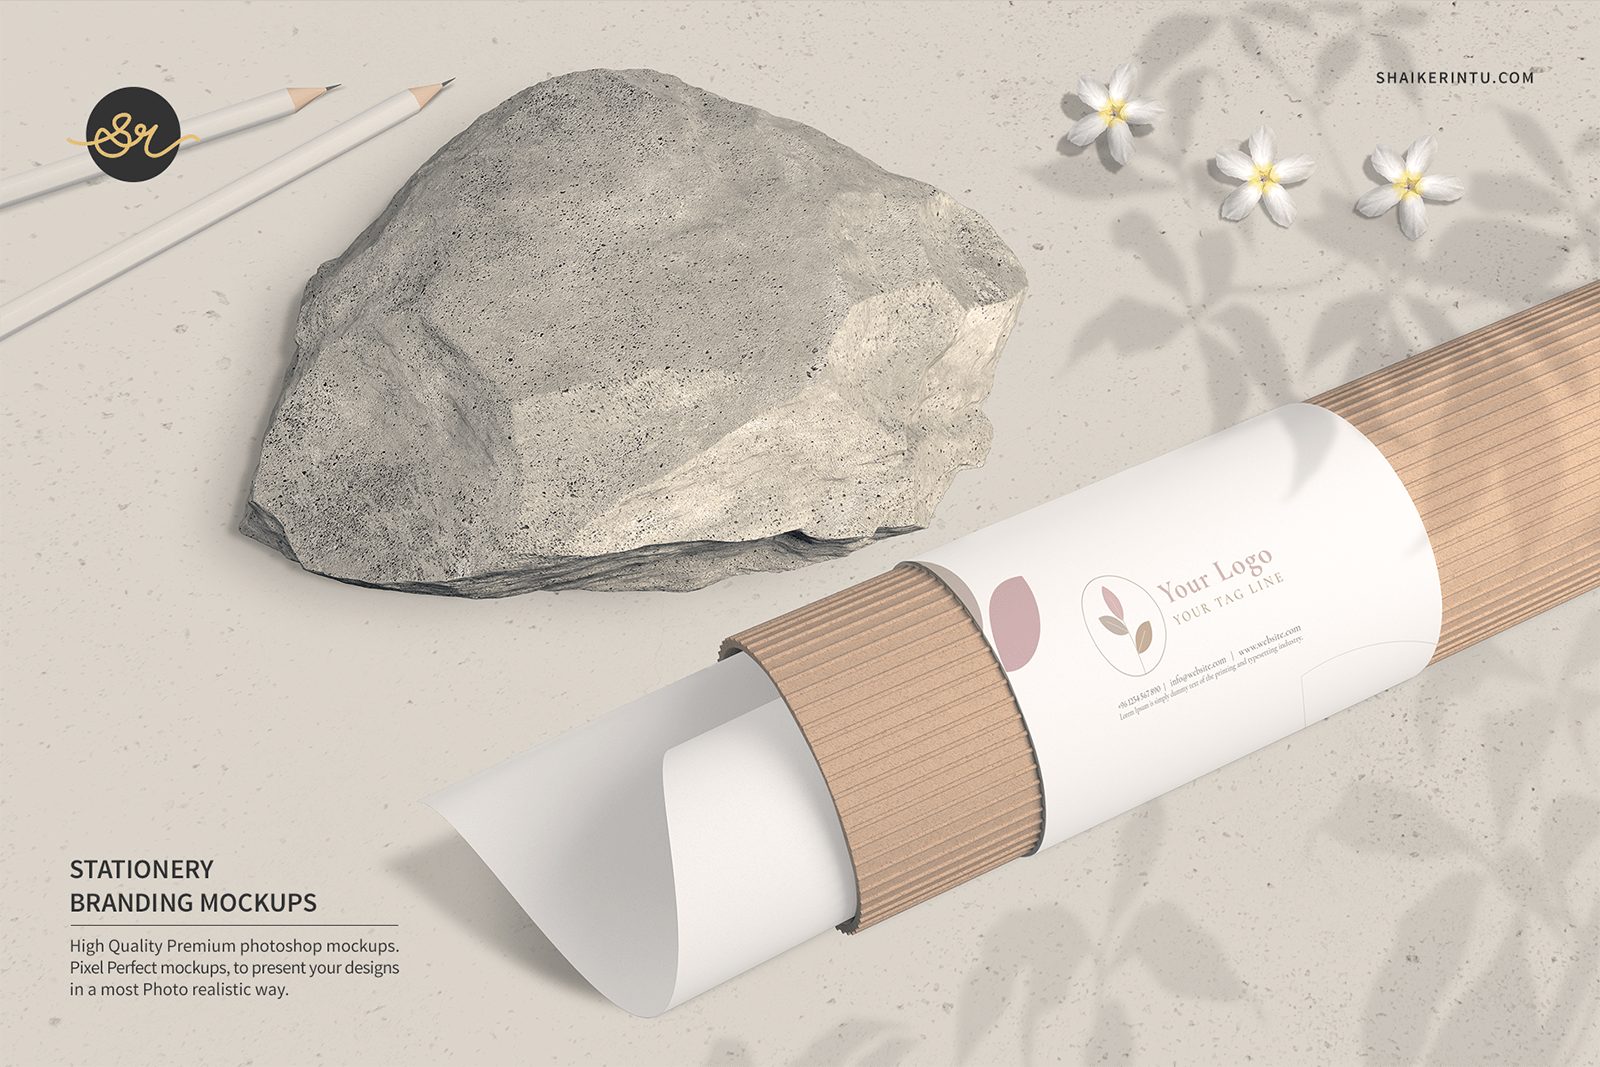 Realistic cardboard paper tube mockup with label. Paper tube branding mockup scene with stone and flowers. 3D rendering. 3D illustration.